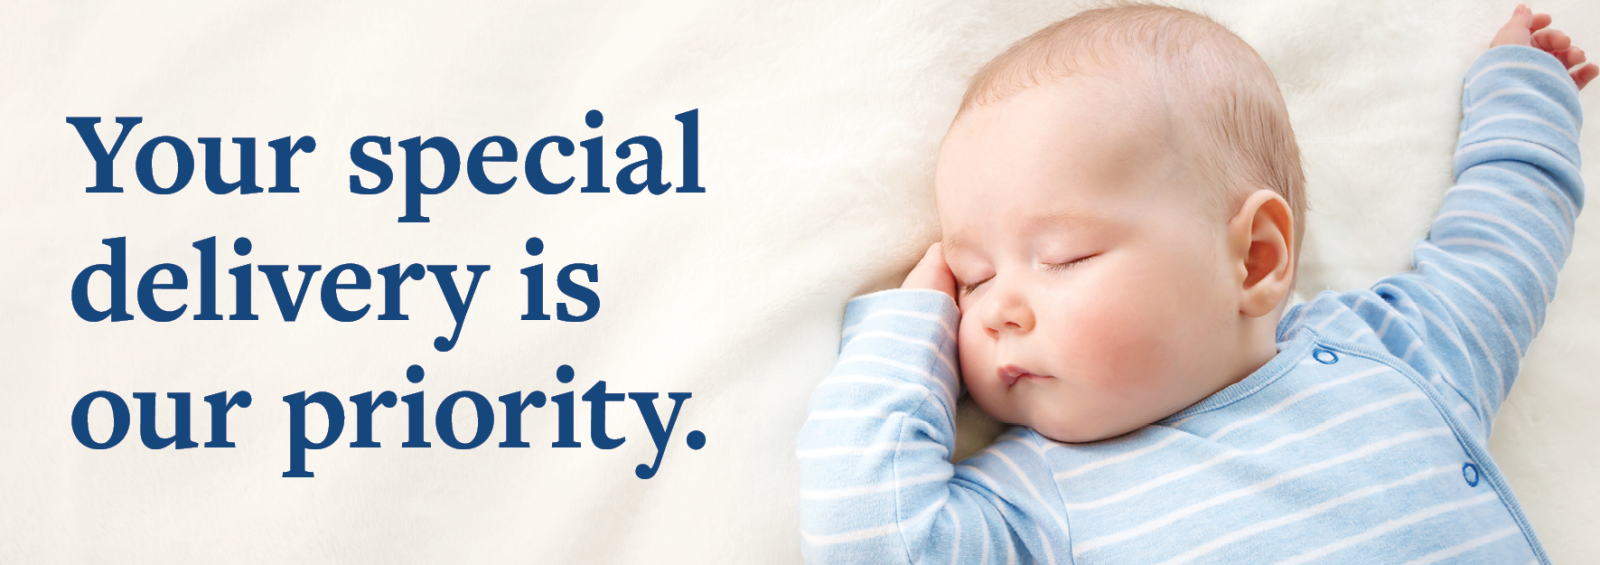 Photo of a baby sleeping. Text reads, "Your special delivery is our top priority."